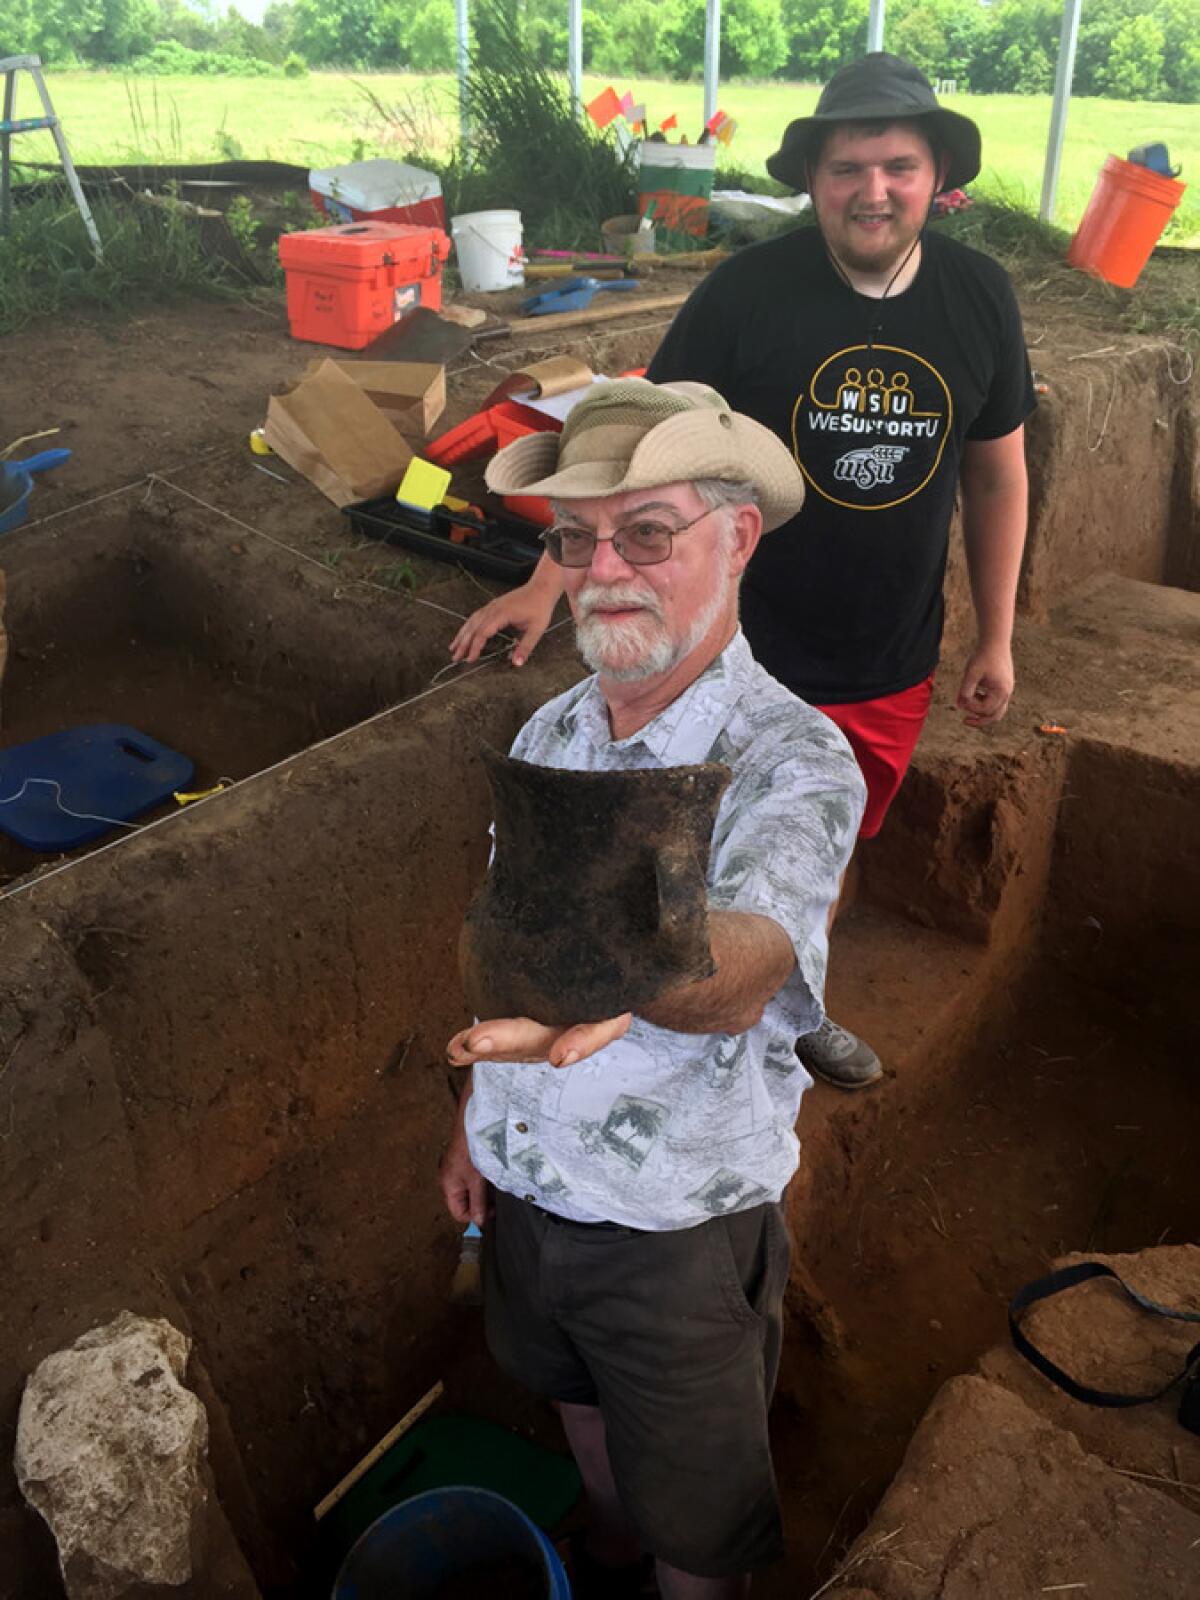 Professor Donald Blakeslee of Wichita State University shows a black pot unearthed by student Jeremiah Perkins, behind him.